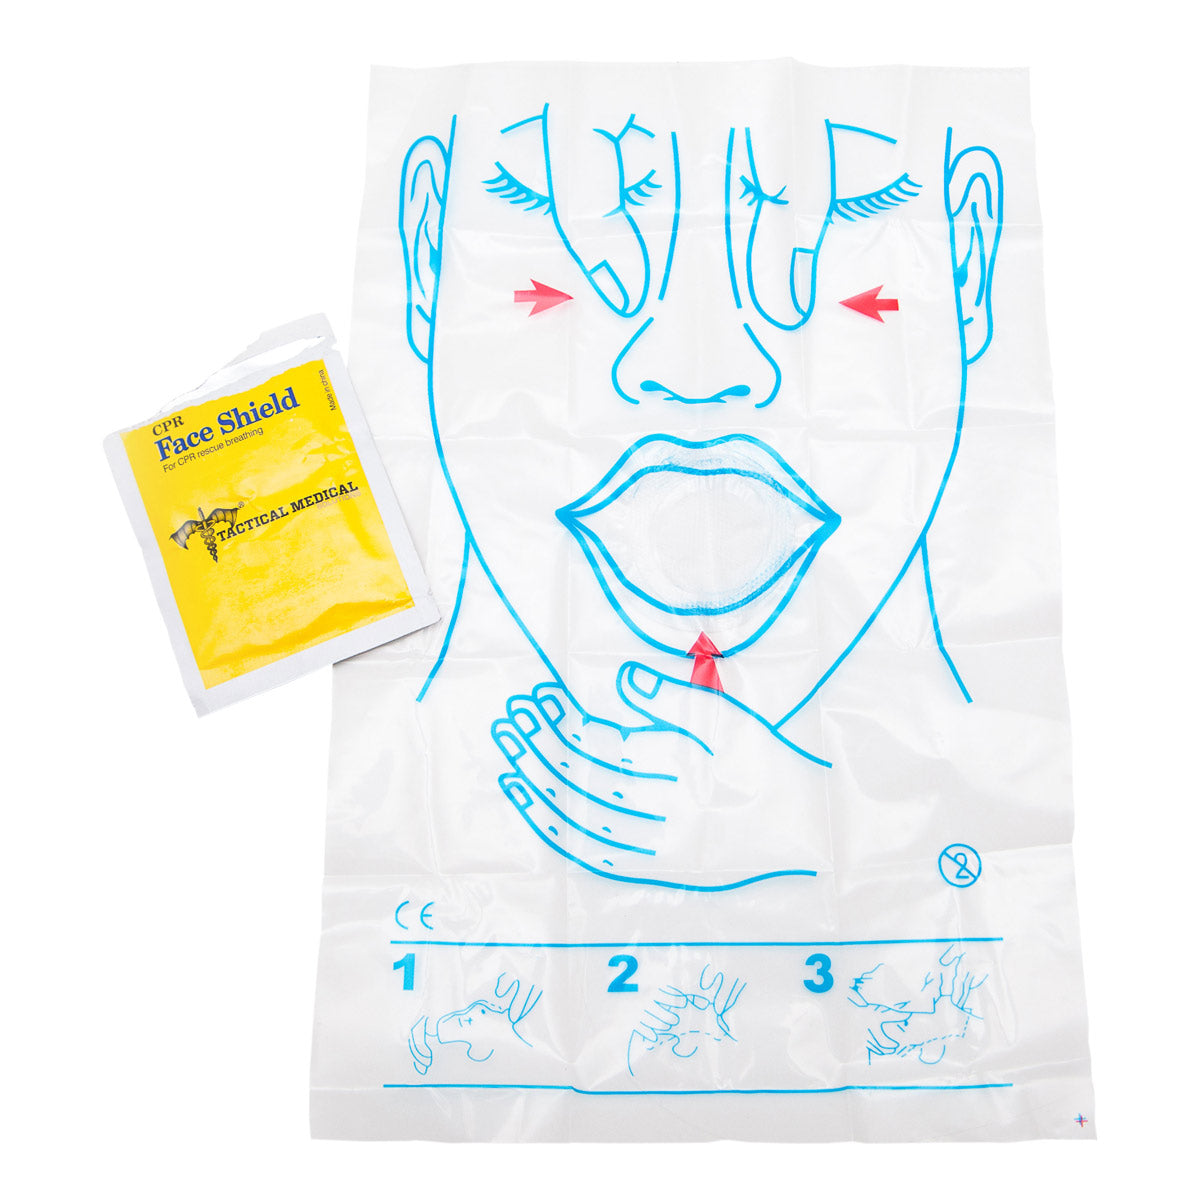 CPR Face Shield